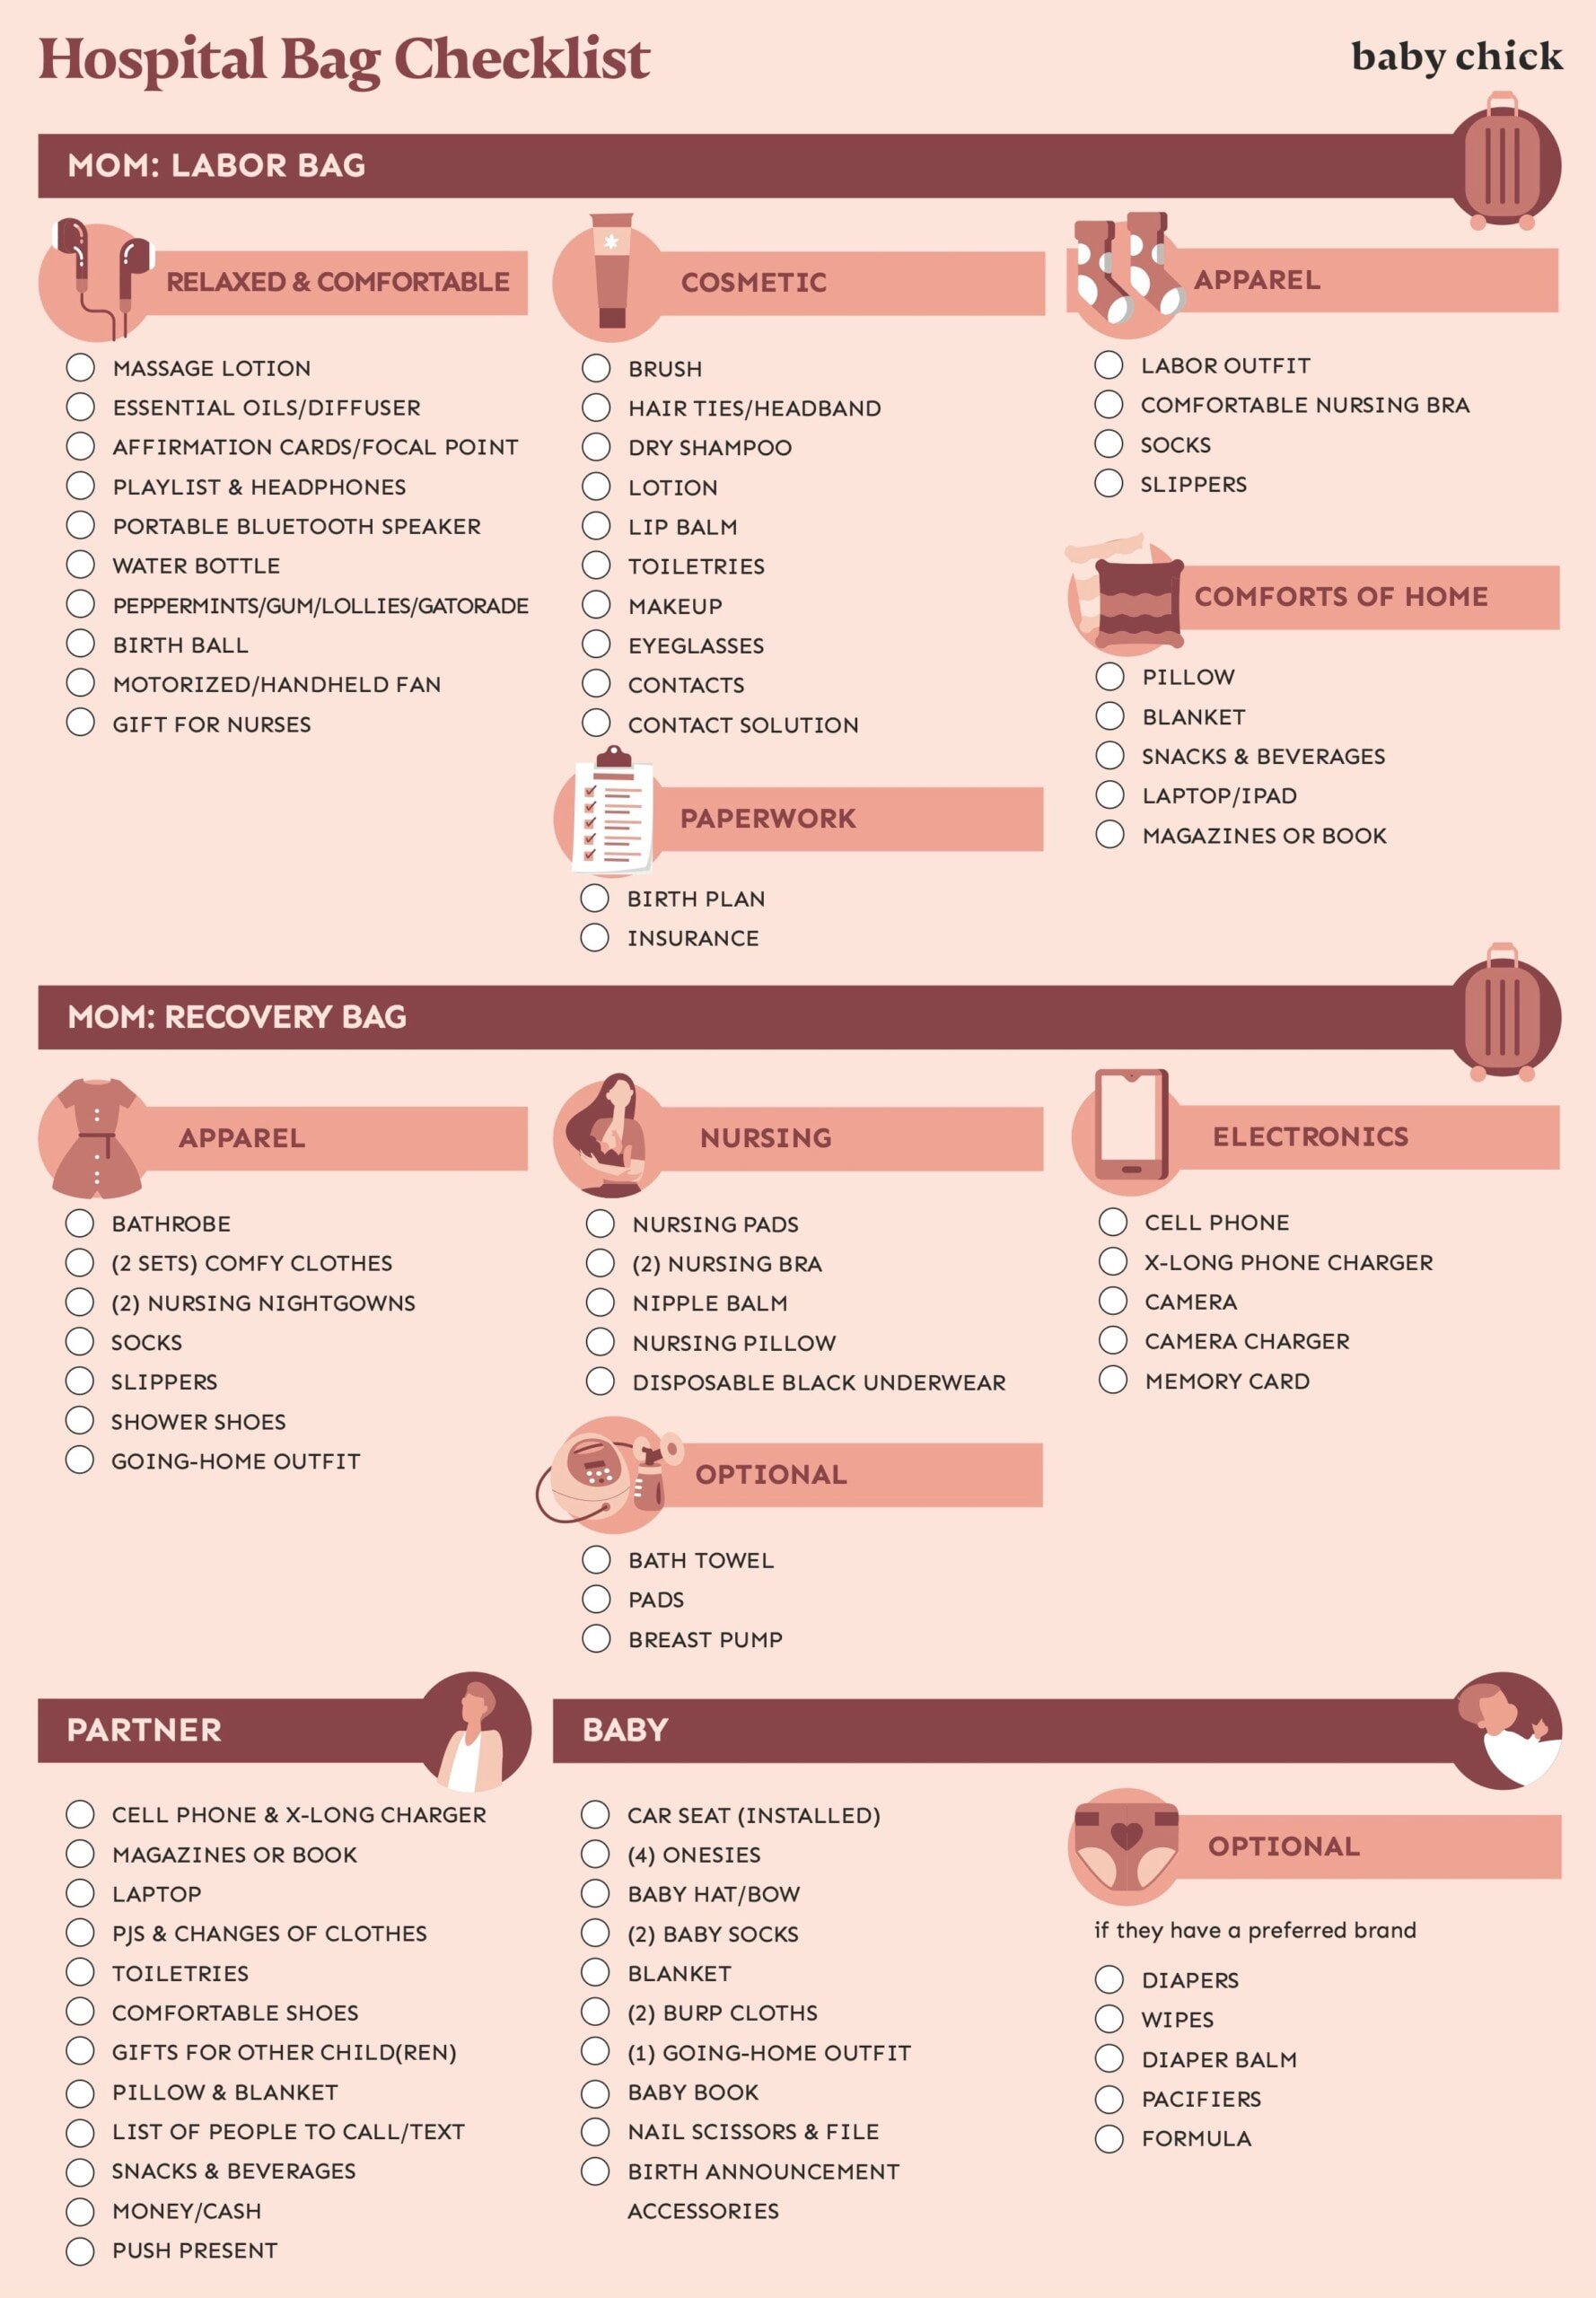 The Ultimate Hospital Bag Checklist for Delivering a Baby